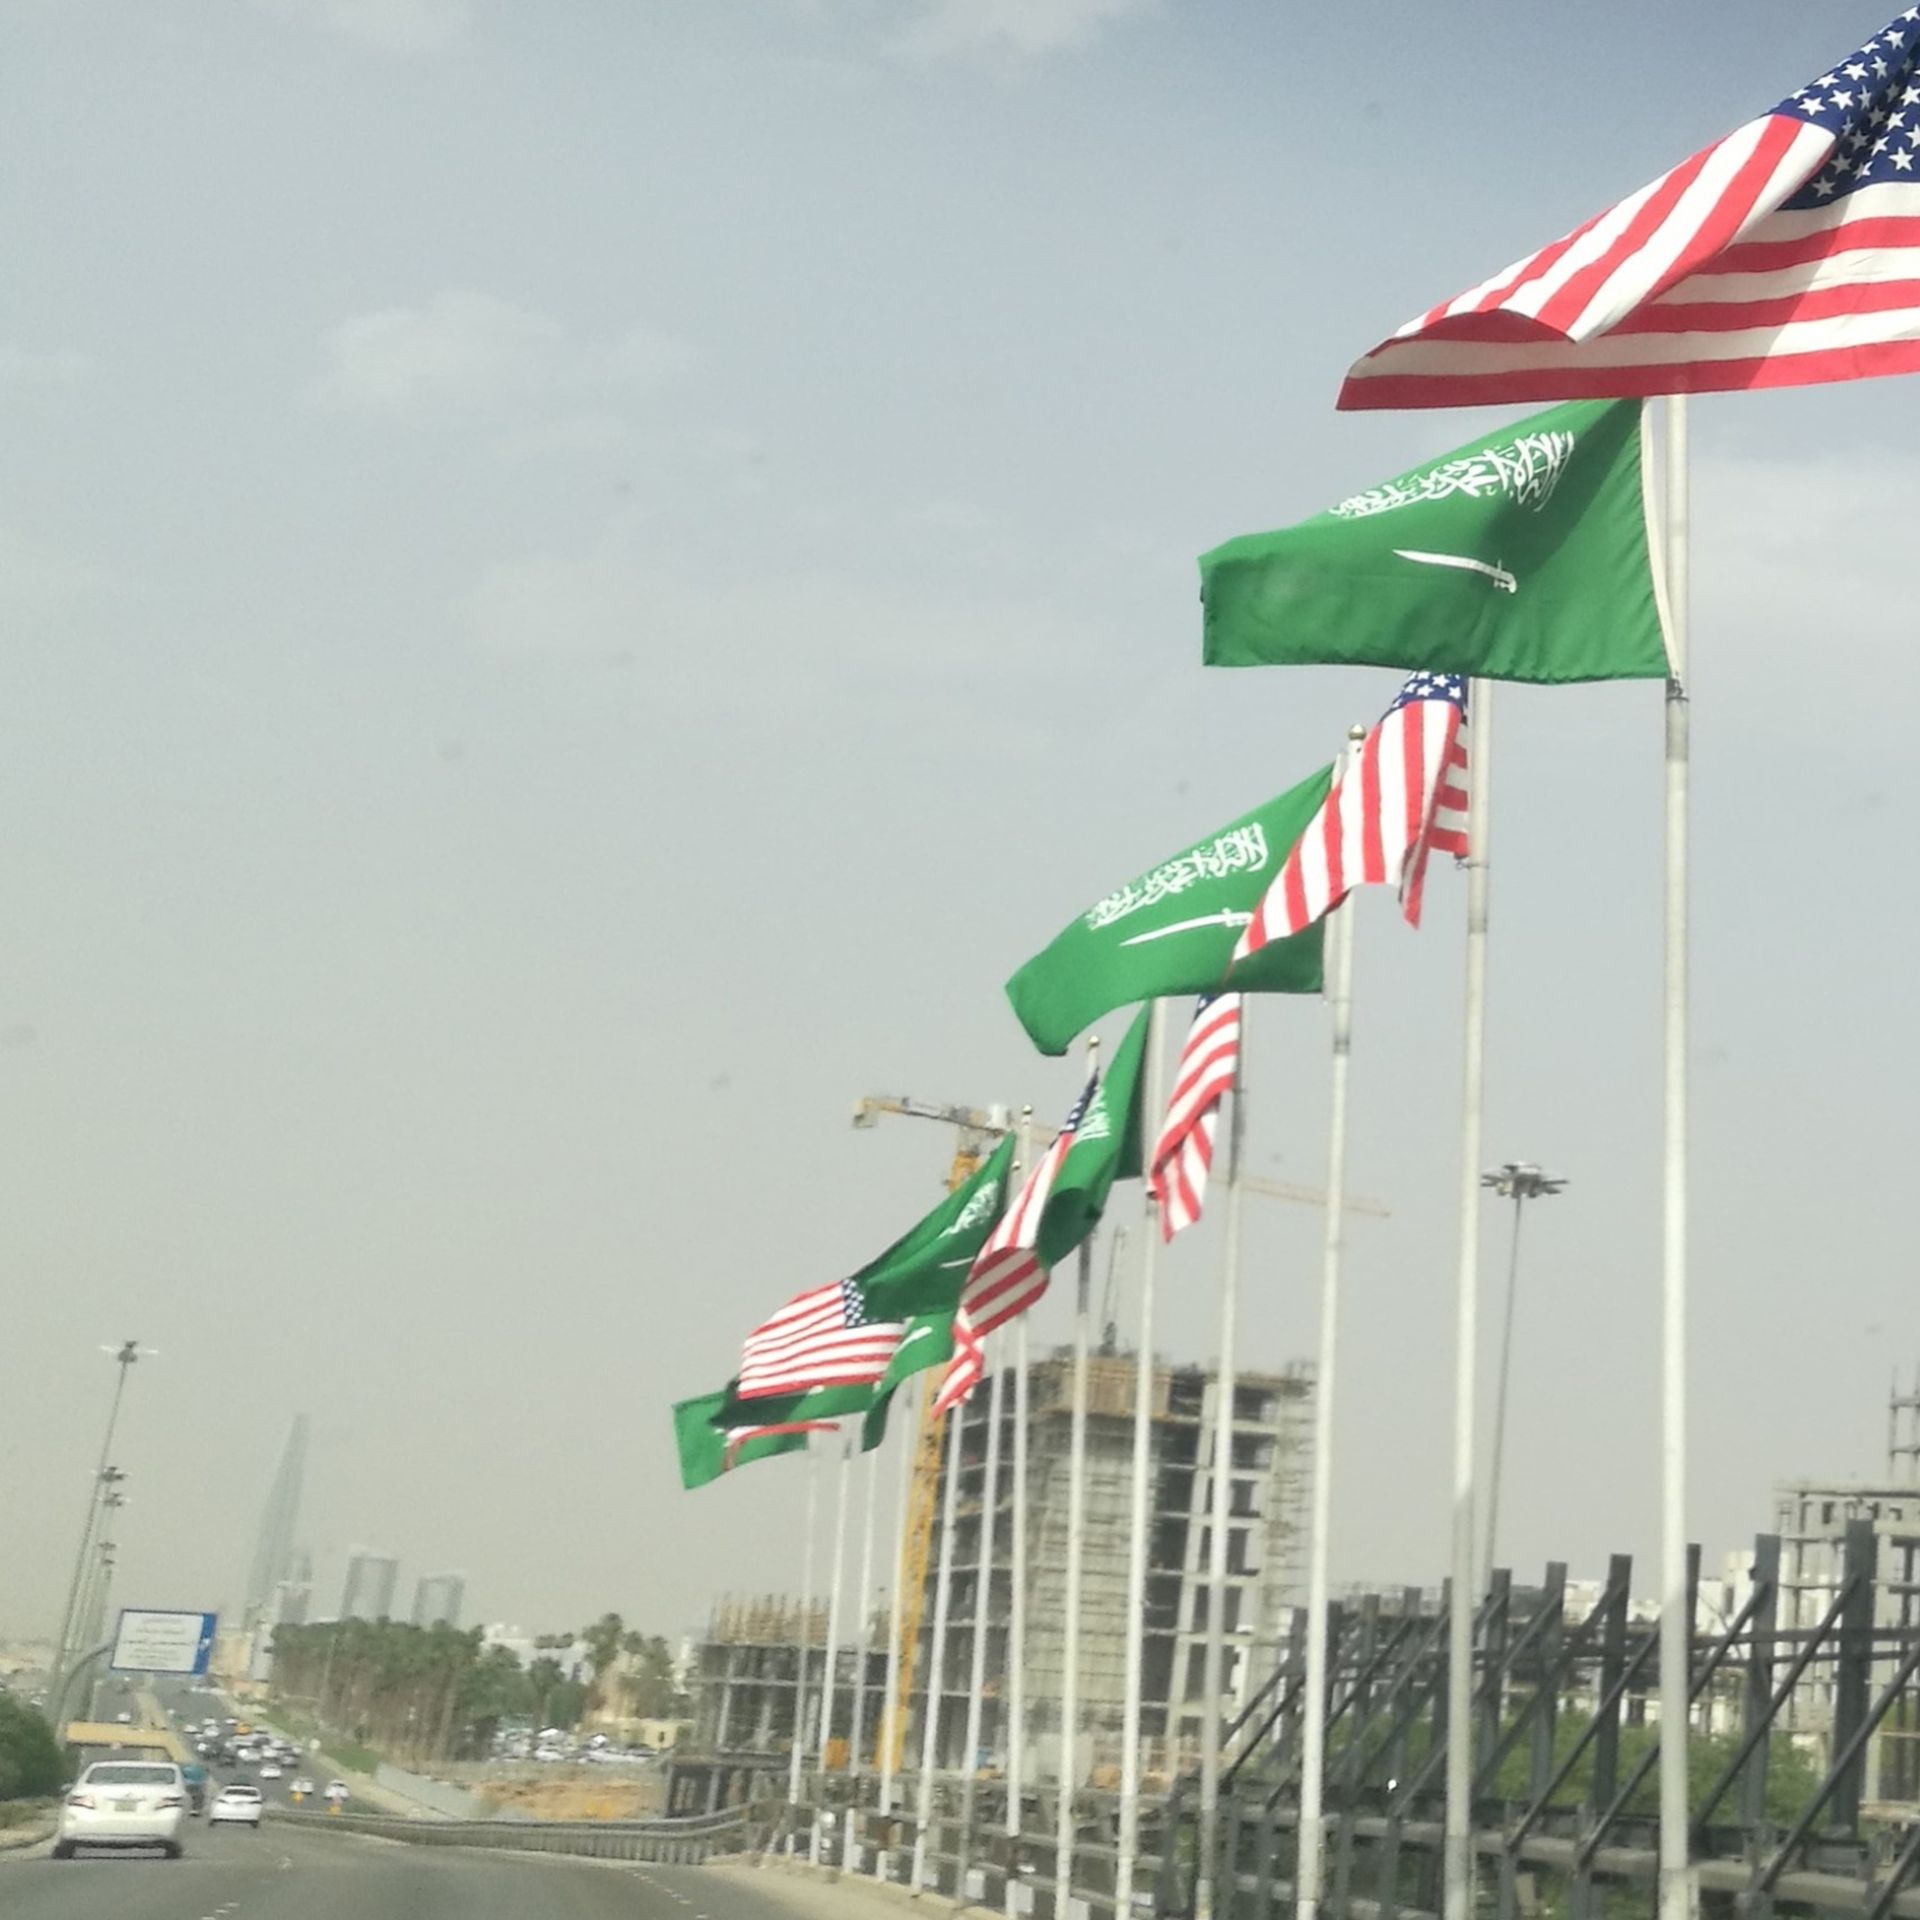 Flags of both United States and Saudi Arabia are raised ahead of U.S President Donald Trump's visit to Saudi Arabia, in Riyadh, Saudi Arabia on May 18, 2017